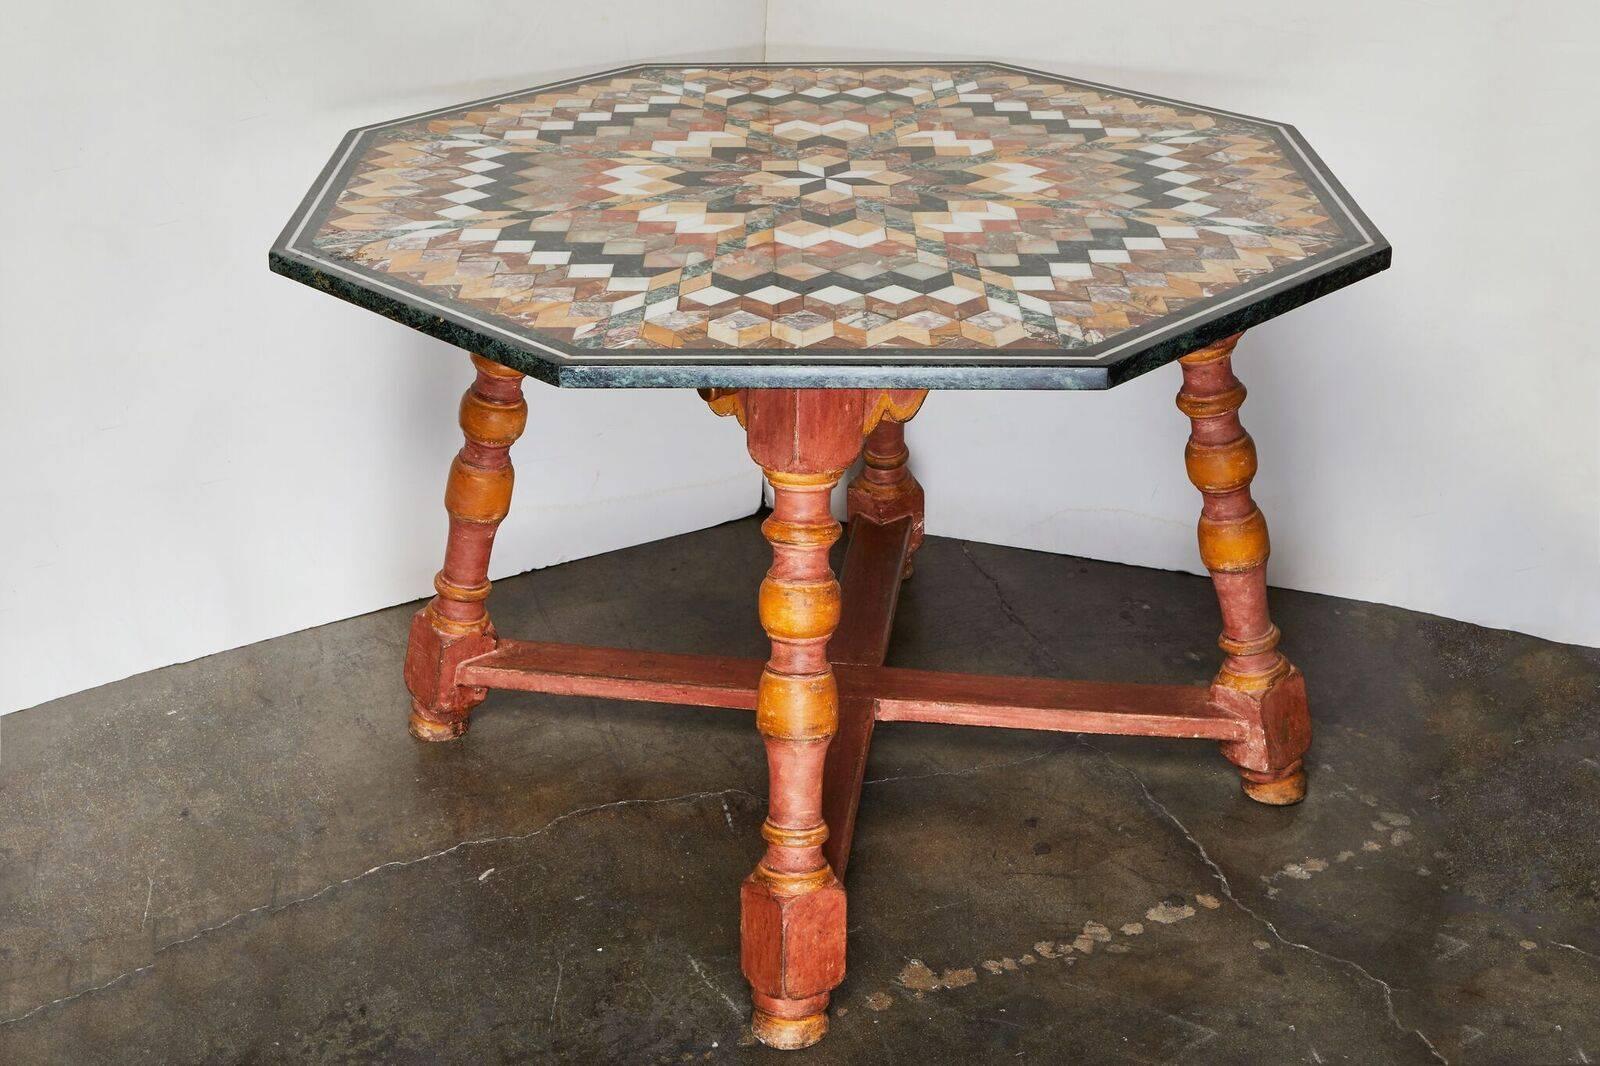 Oversized, dramatic, octagonal, circa 1930 Tuscan, specimen marble table atop a painted, turned-leg base with X-stretcher.